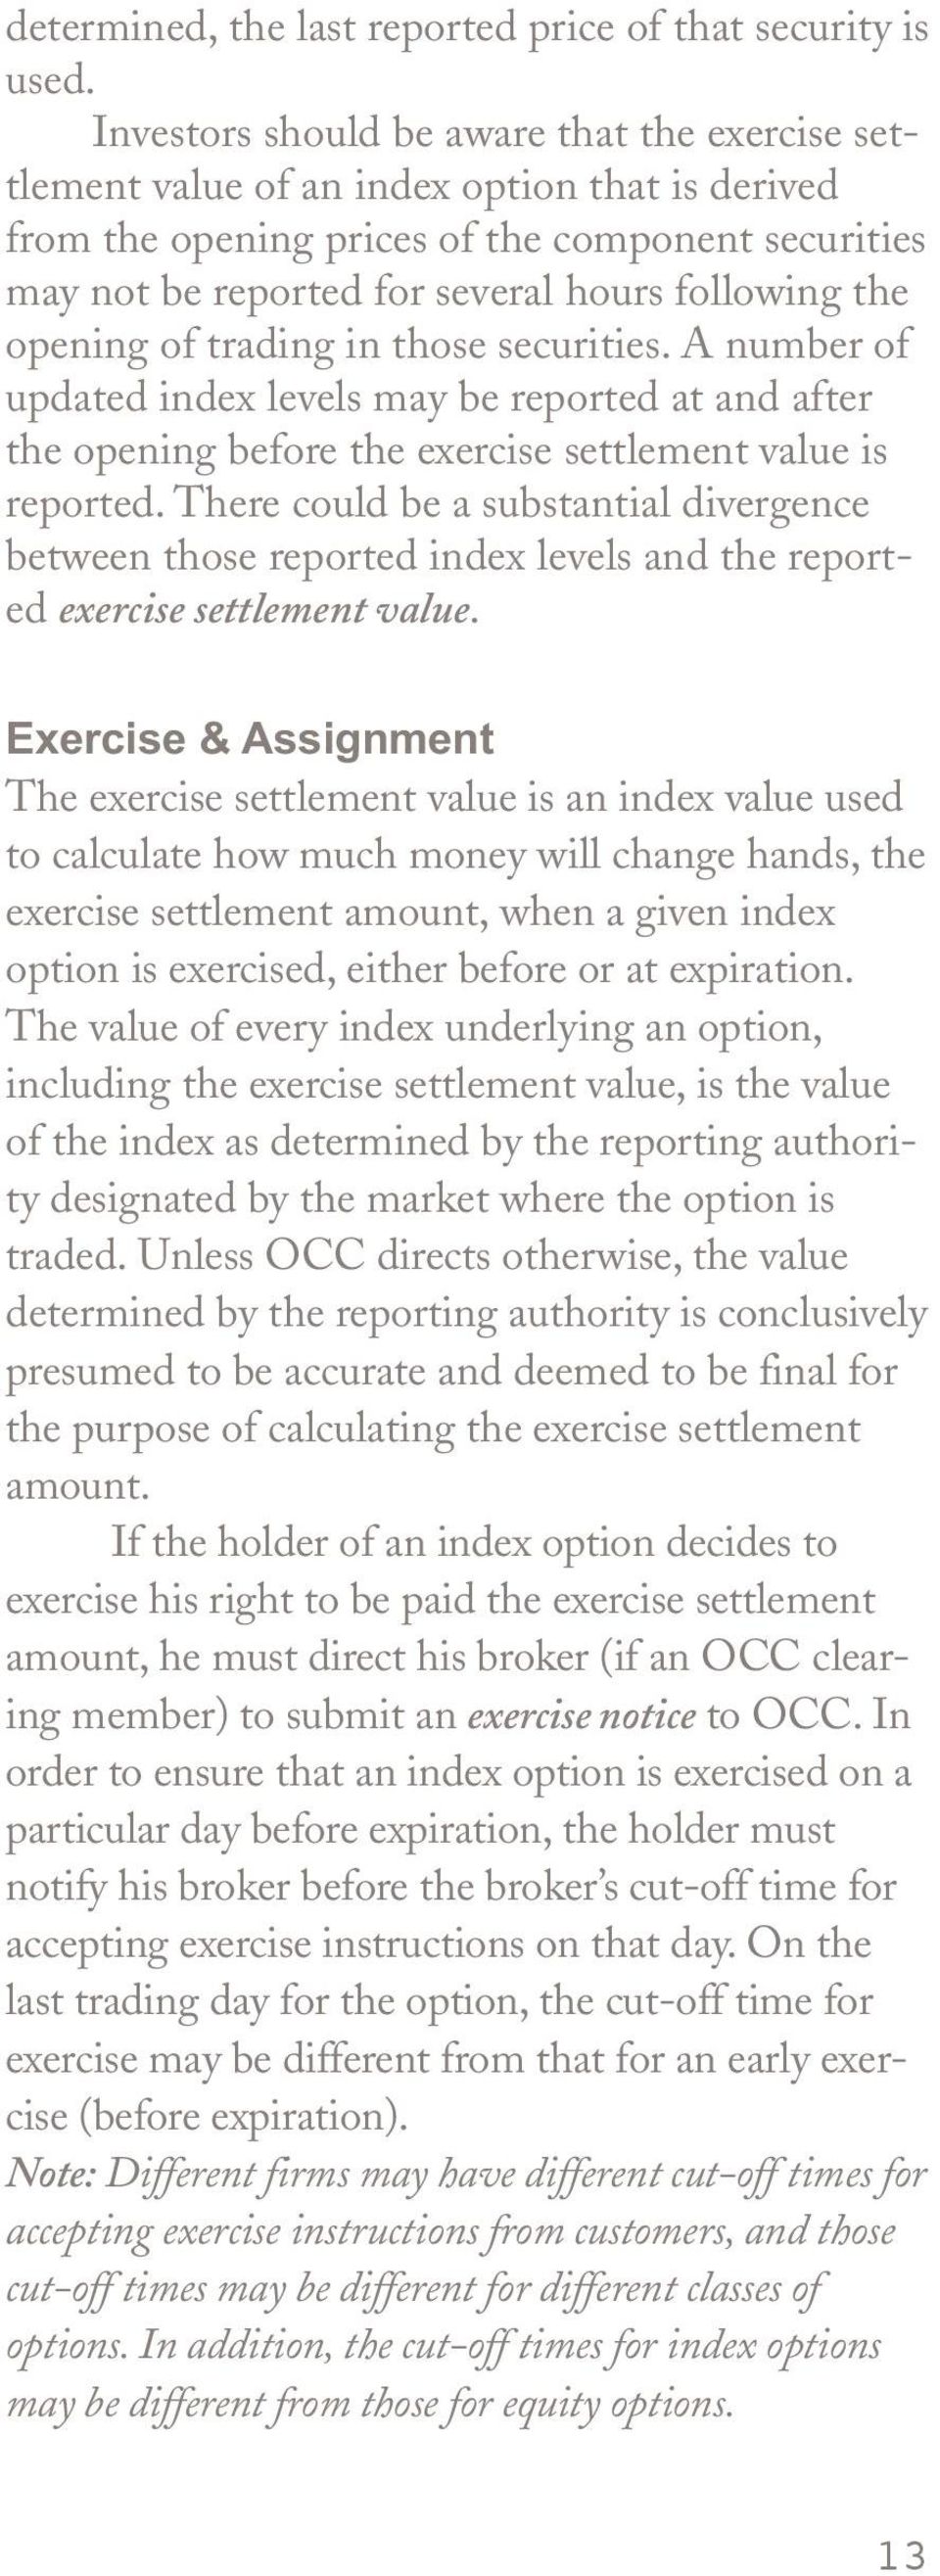 opening of trading in those securities. A number of updated index levels may be reported at and after the opening before the exercise settlement value is reported.